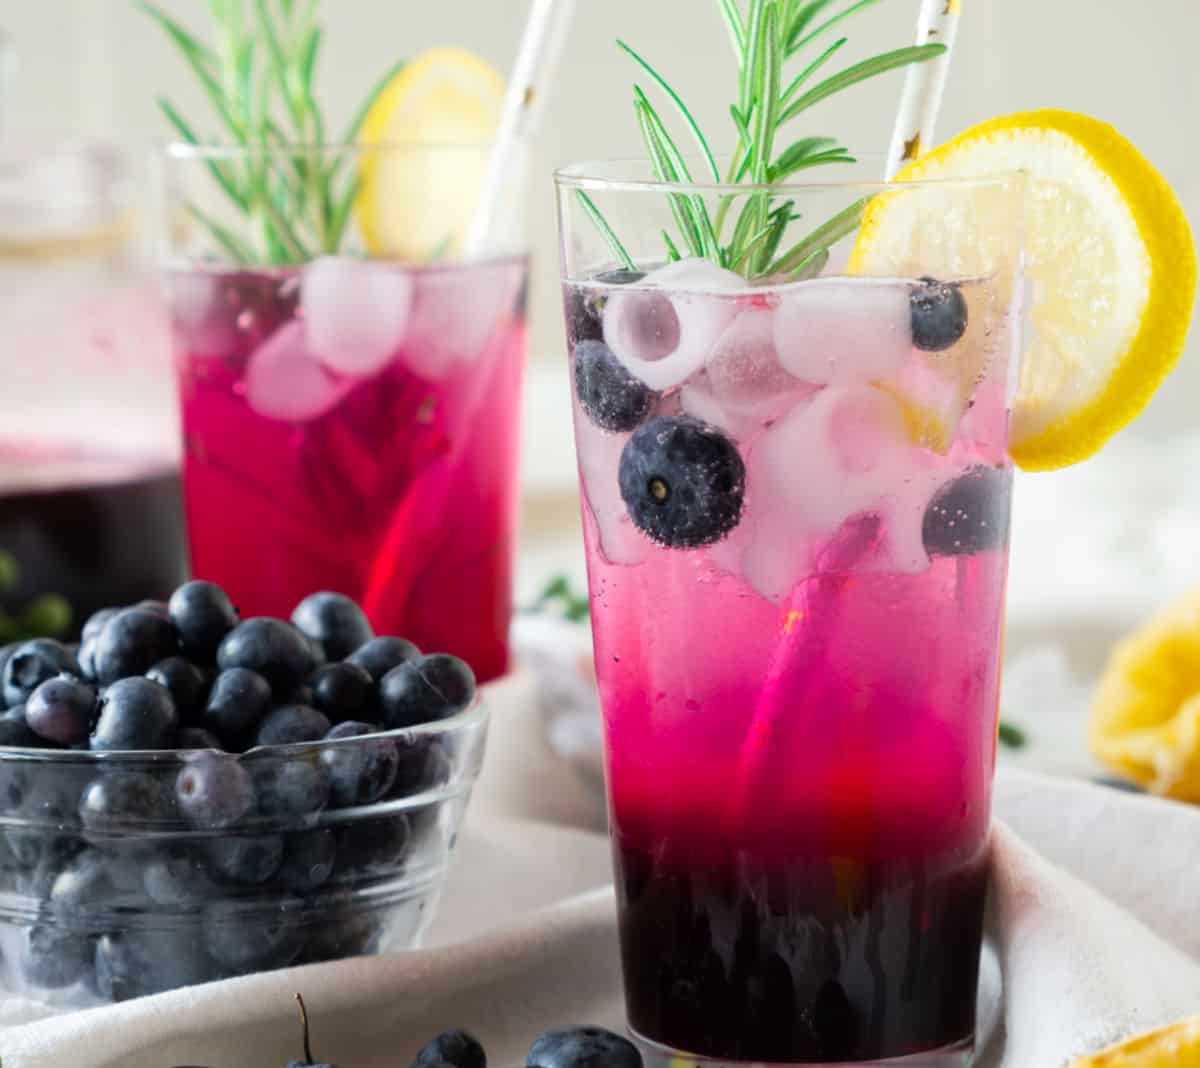 Bowl of blueberries and tall glasses of blueberry lemonade with rosemary sprigs and lemon slices.